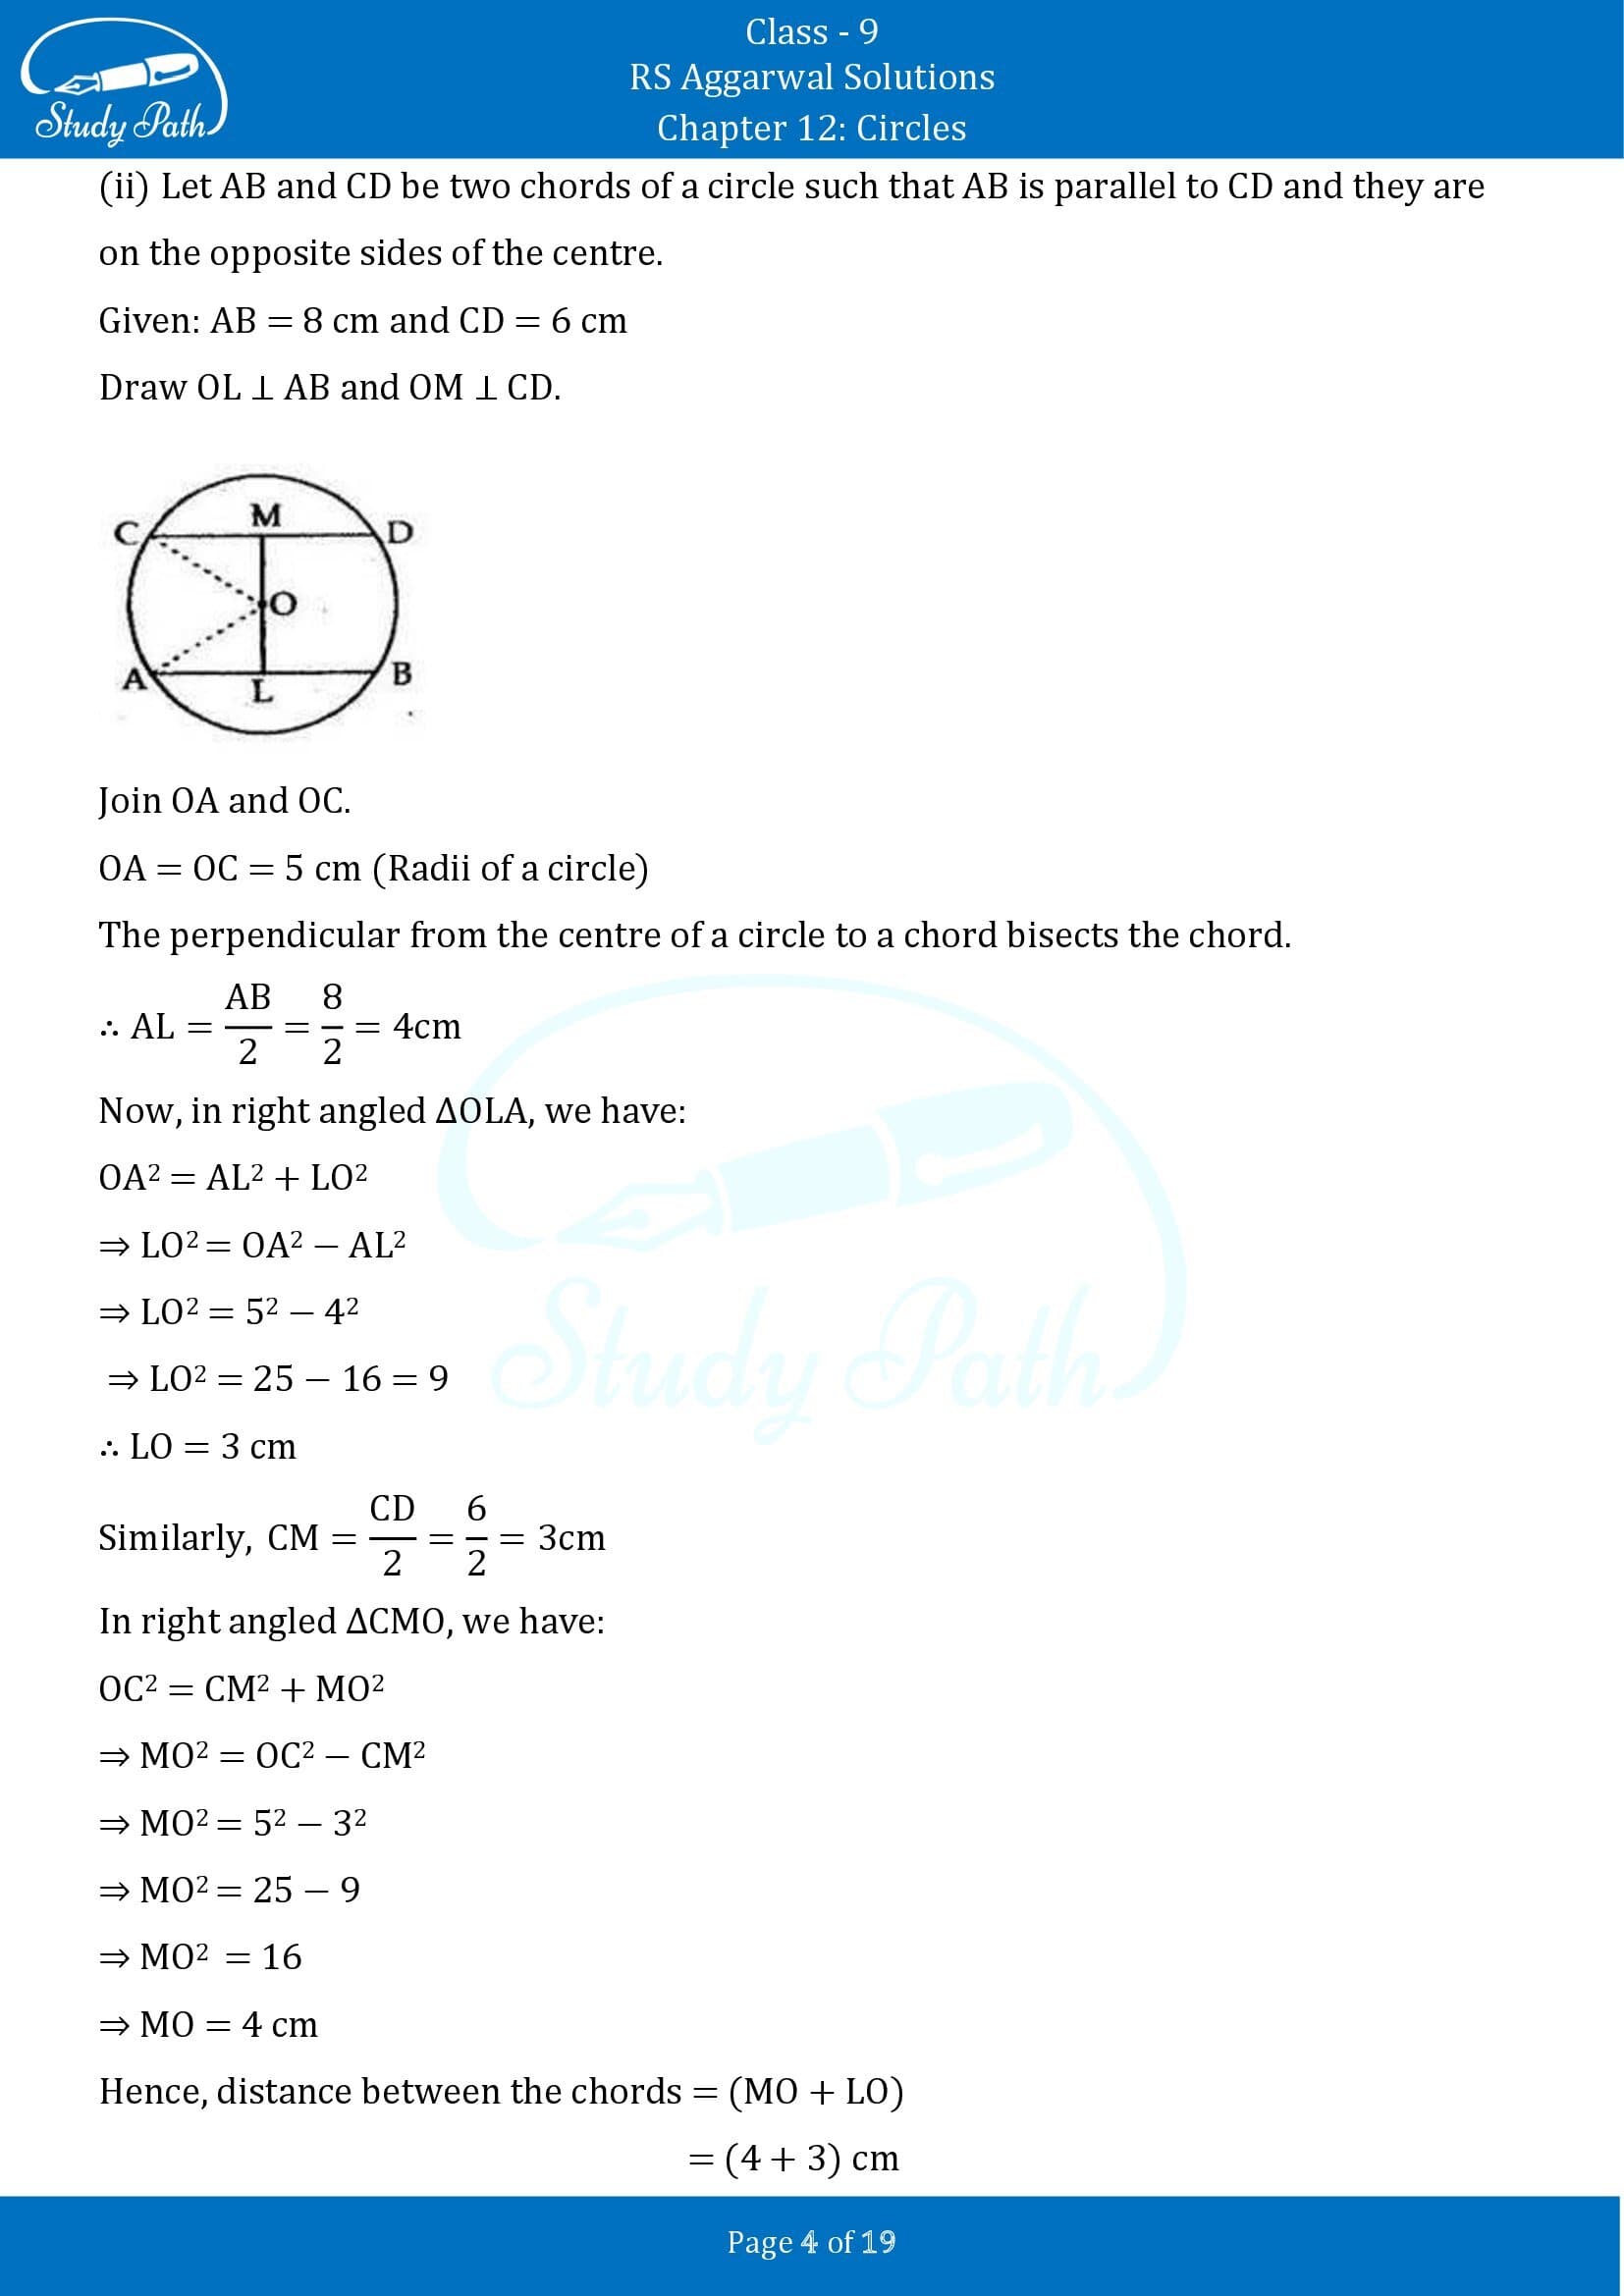 RS Aggarwal Solutions Class 9 Chapter 12 Circles Exercise 12A 00004